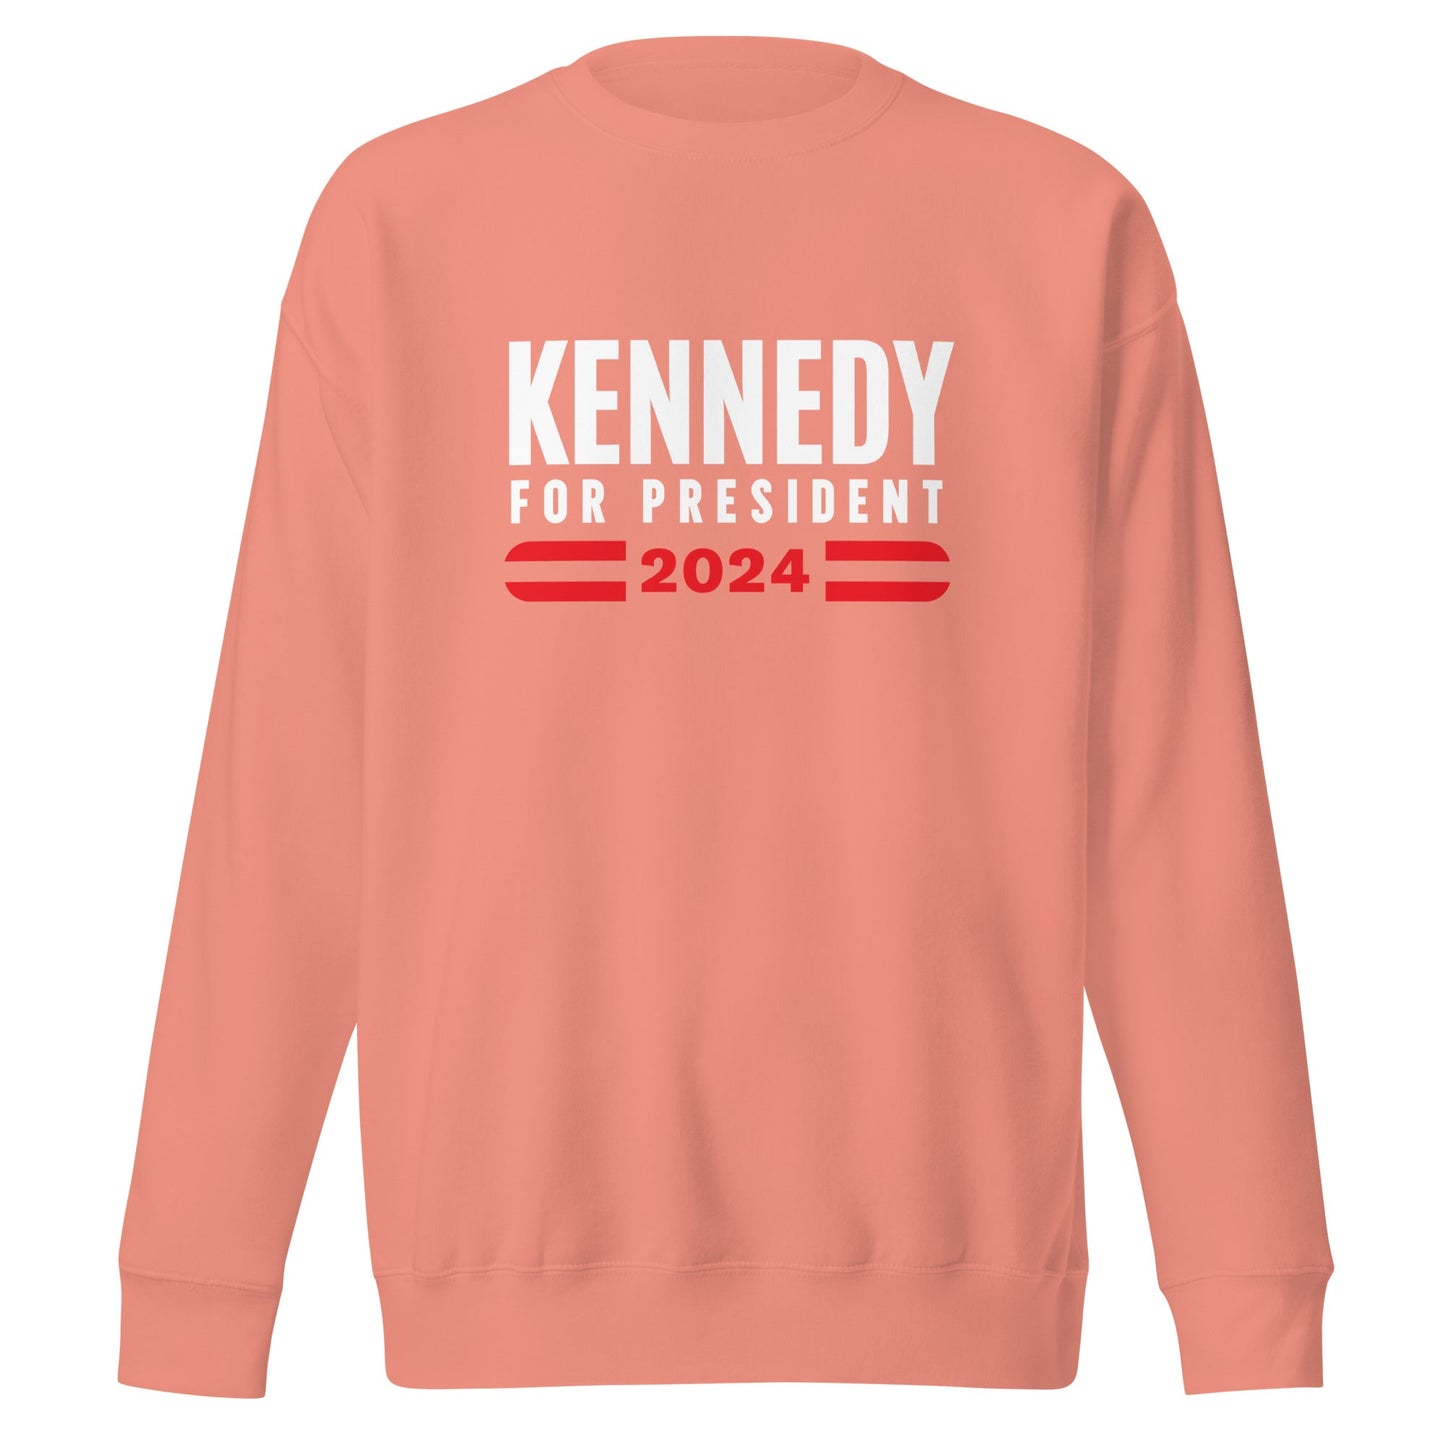 Kennedy for President 2024 Unisex Sweatshirt - TEAM KENNEDY. All rights reserved